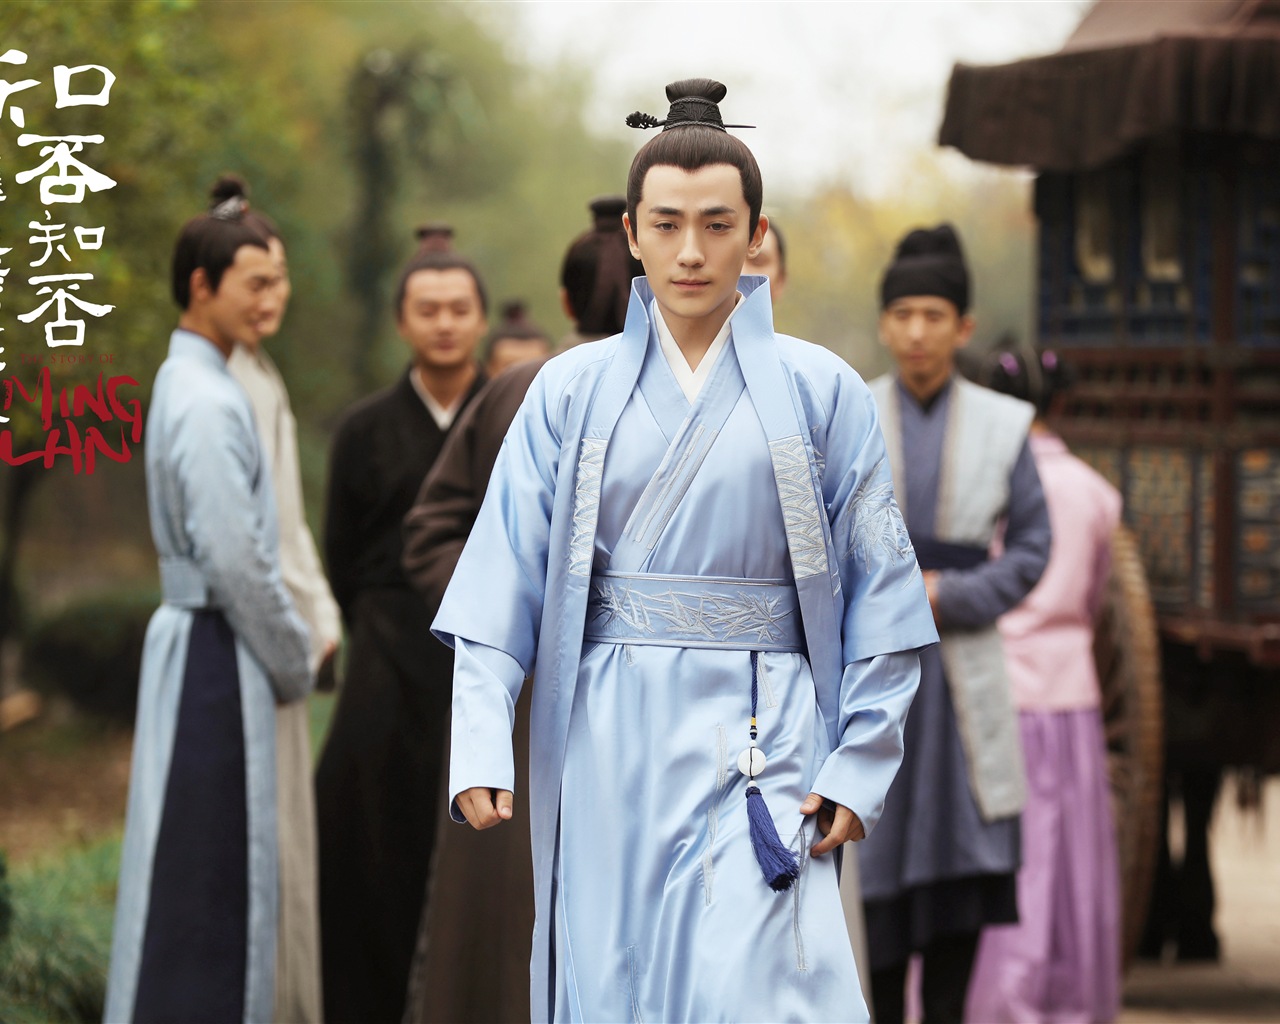 The Story Of MingLan, TV series HD wallpapers #54 - 1280x1024